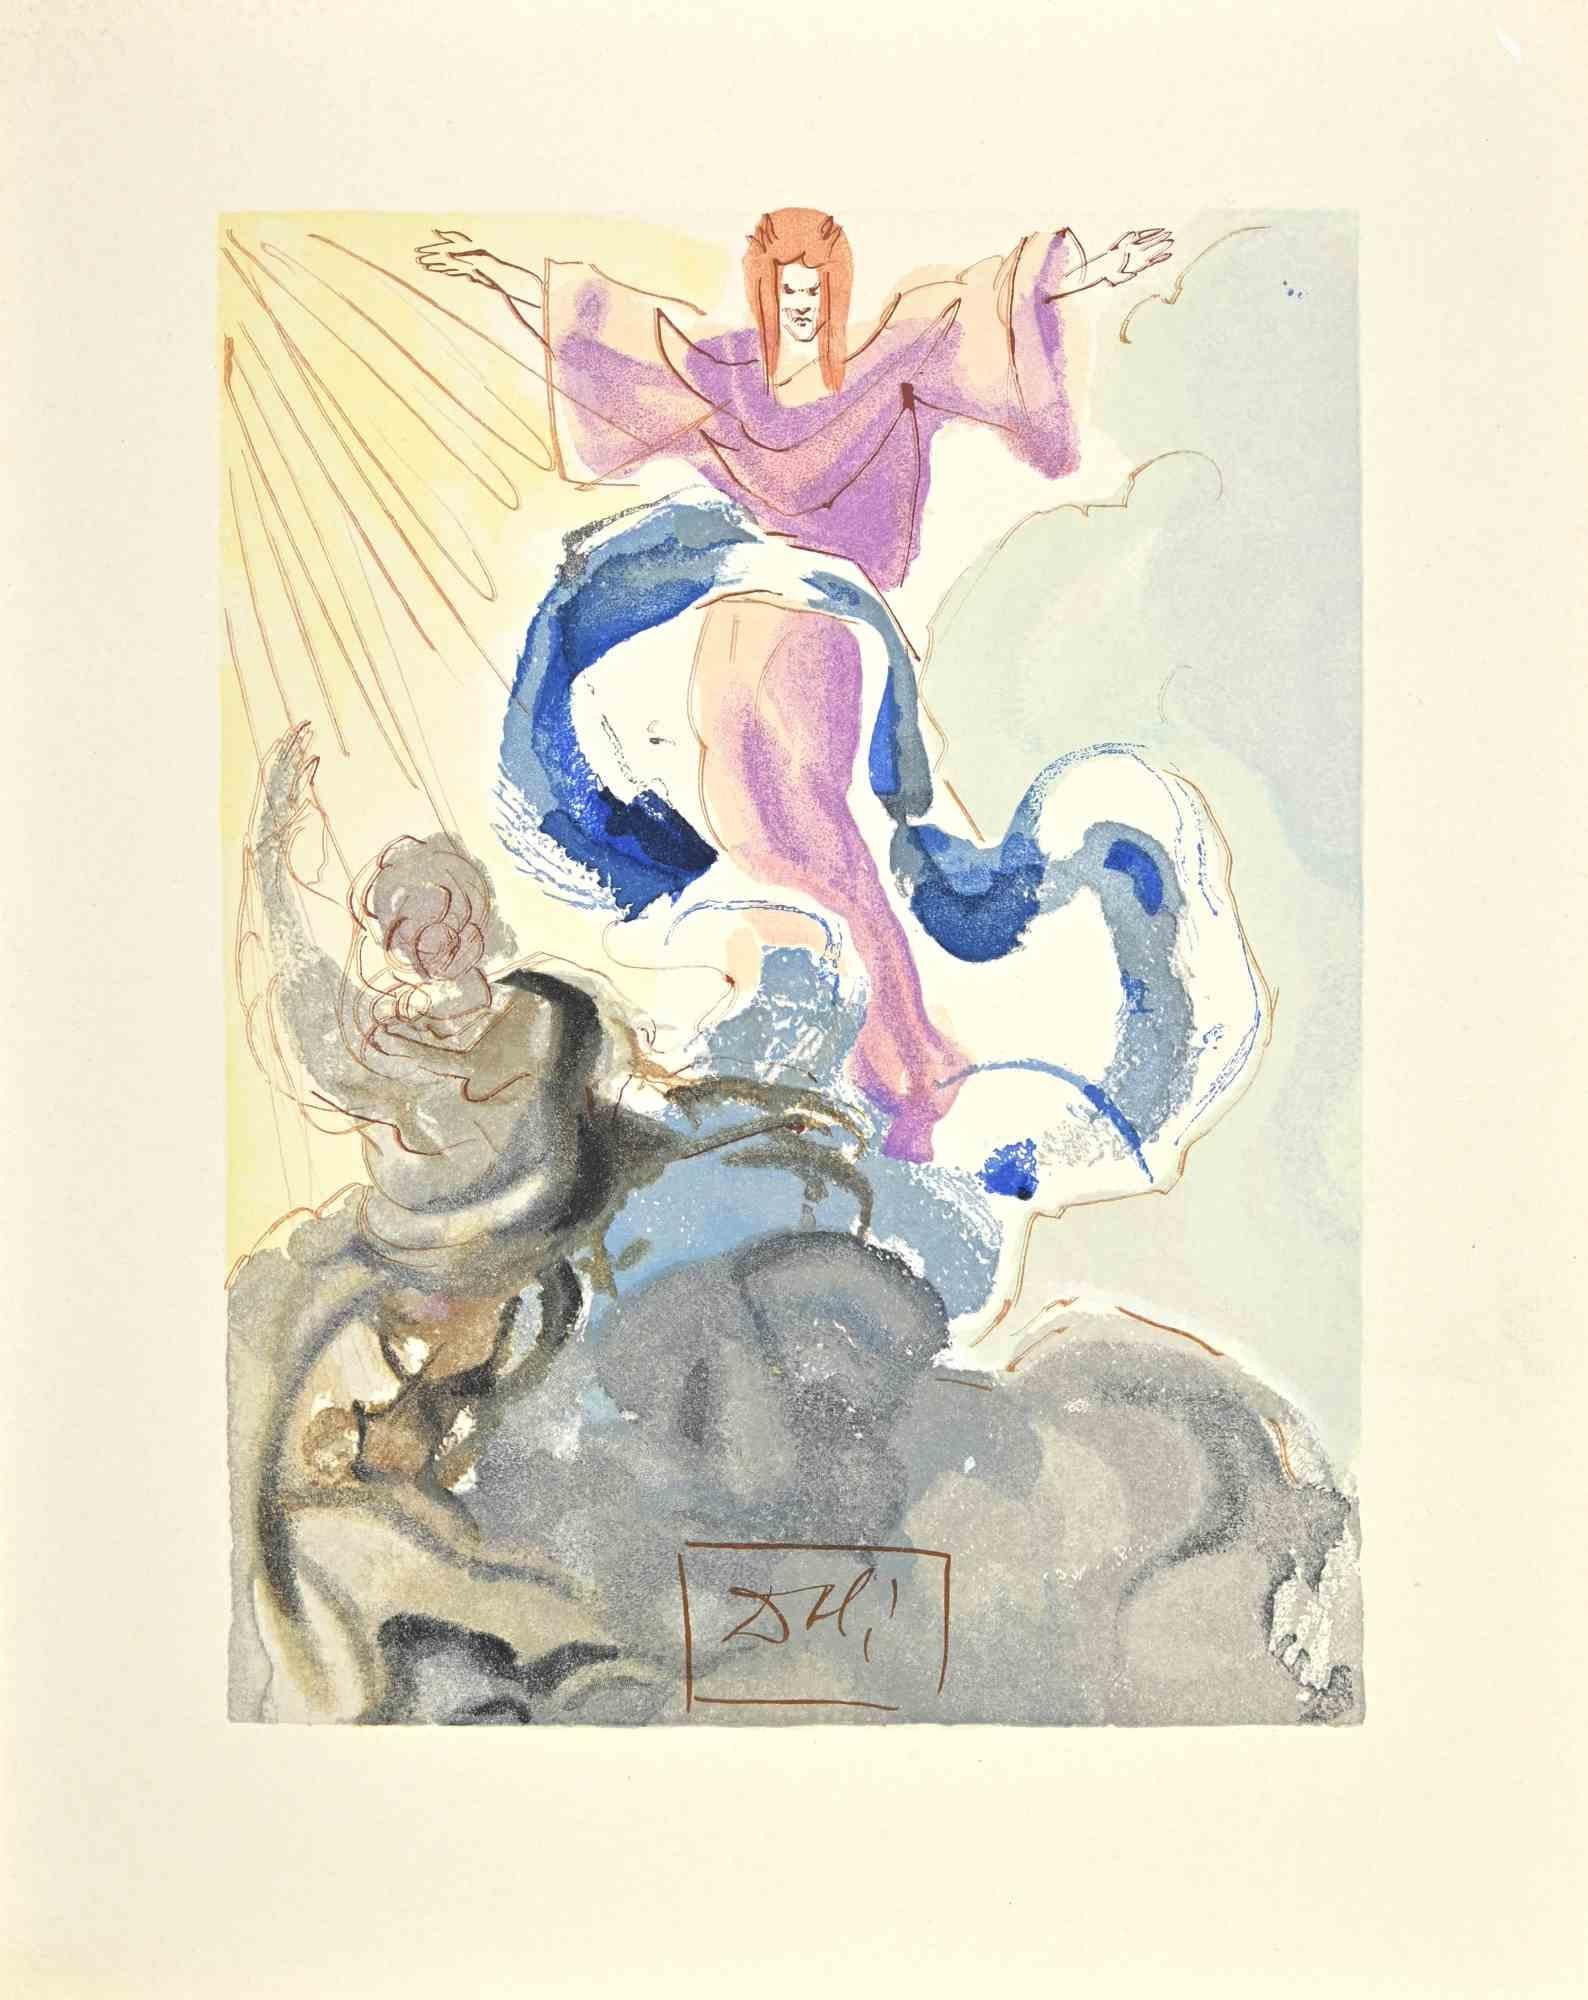 Salvador Dalí Figurative Print - The Song of the Wise Spirits - Woodcut - 1963